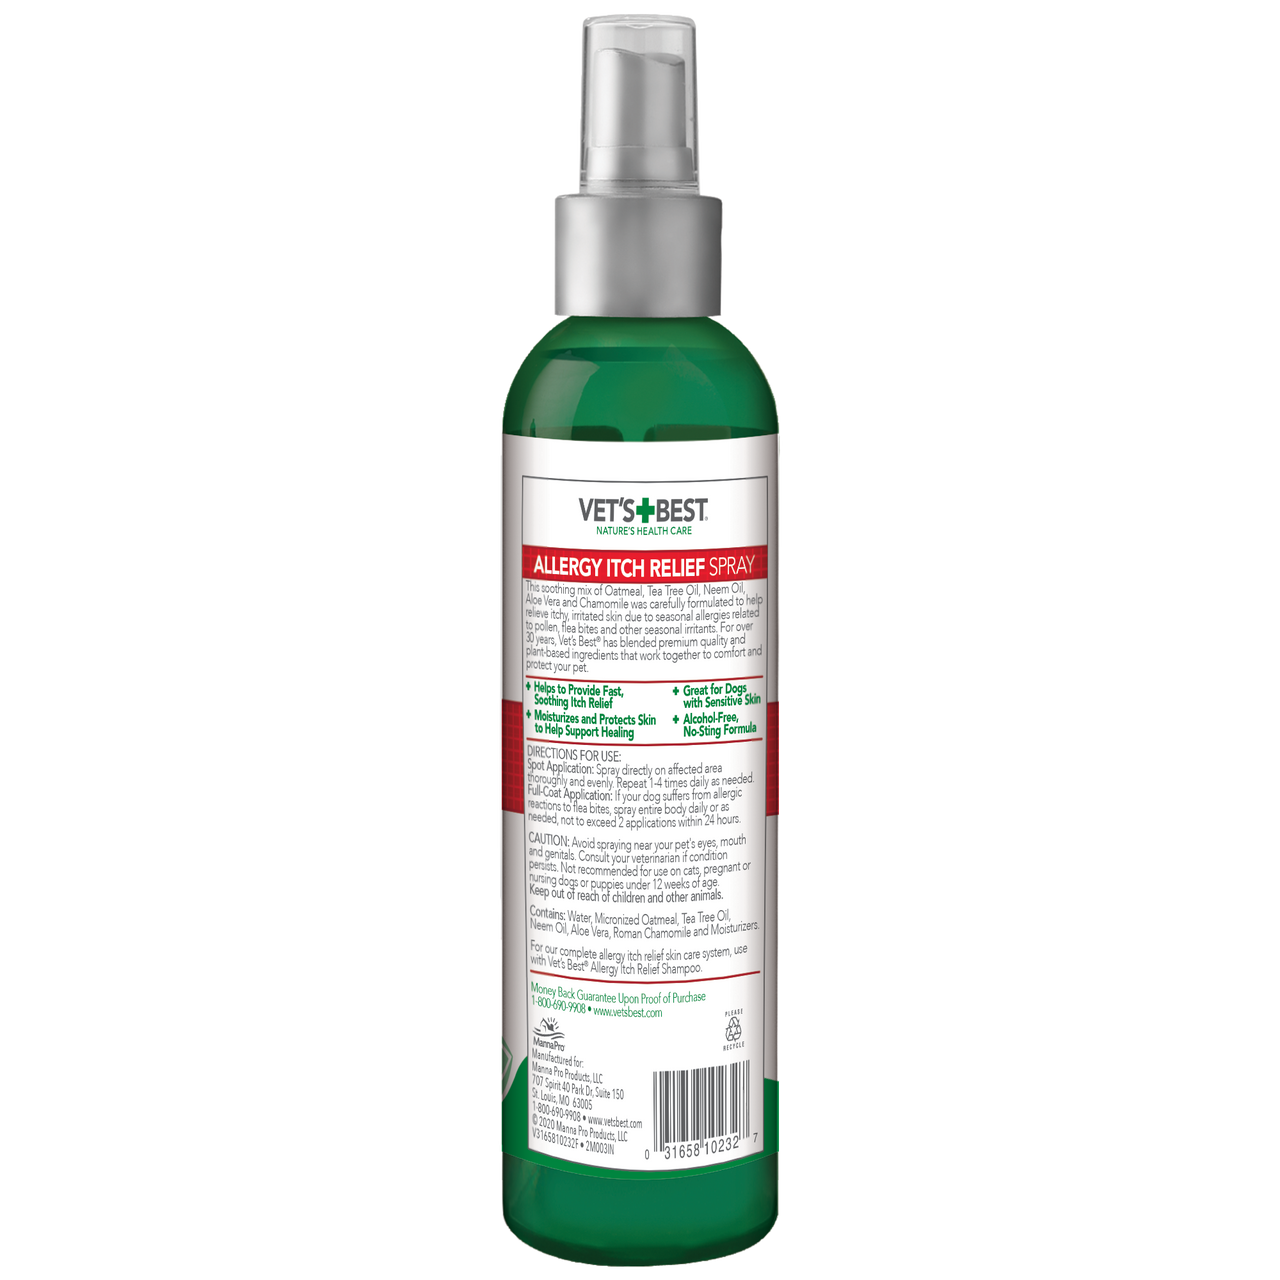 Vet's Best Allergy Itch Relief Spray Back